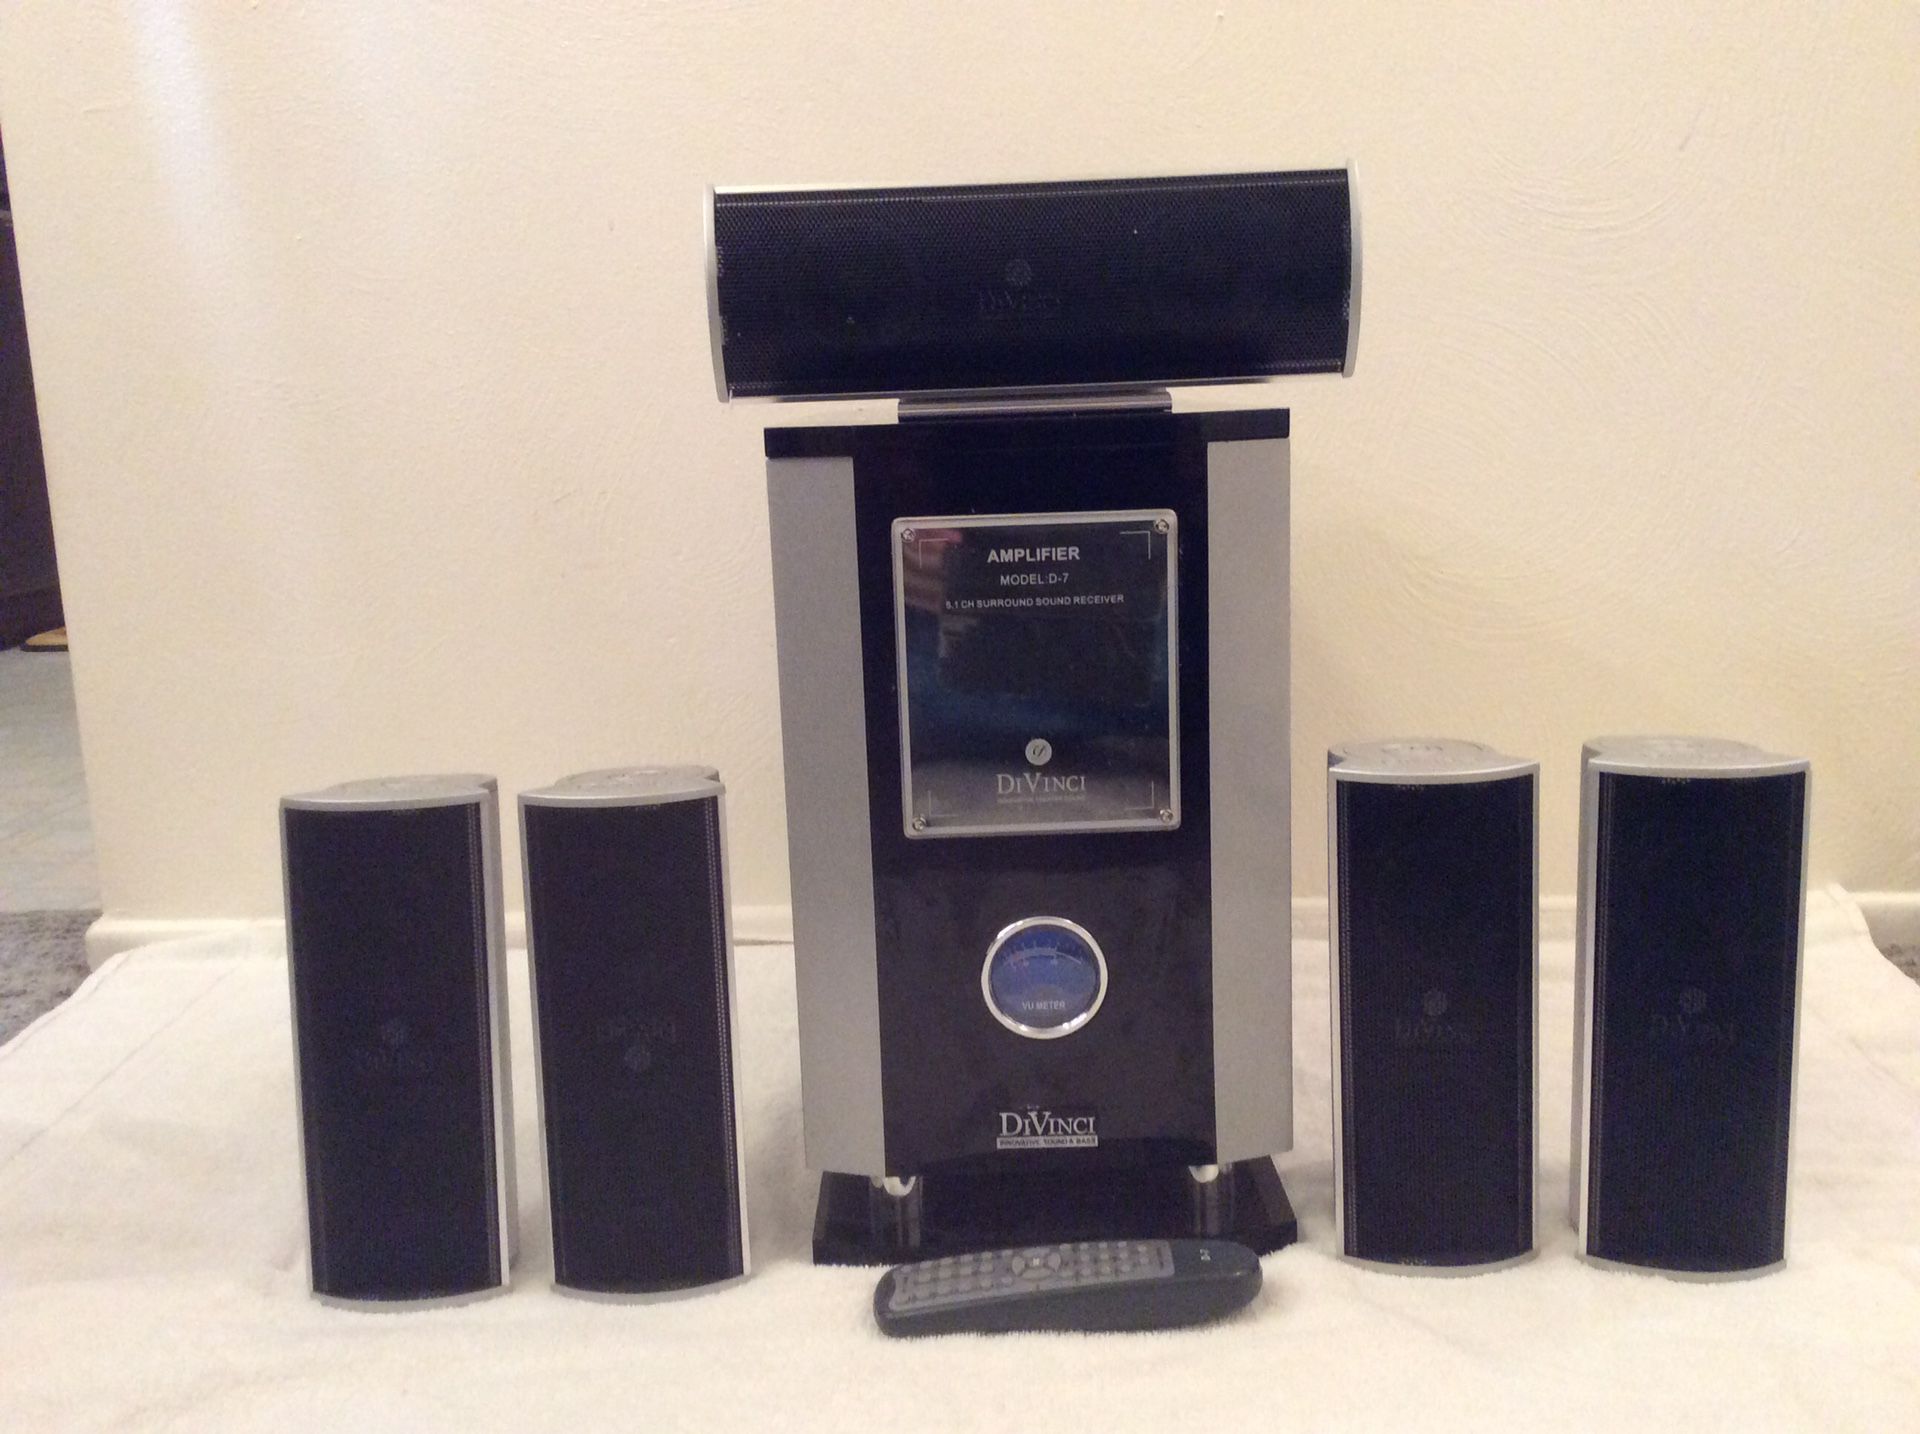 DiVinci D-7 Home Theater System